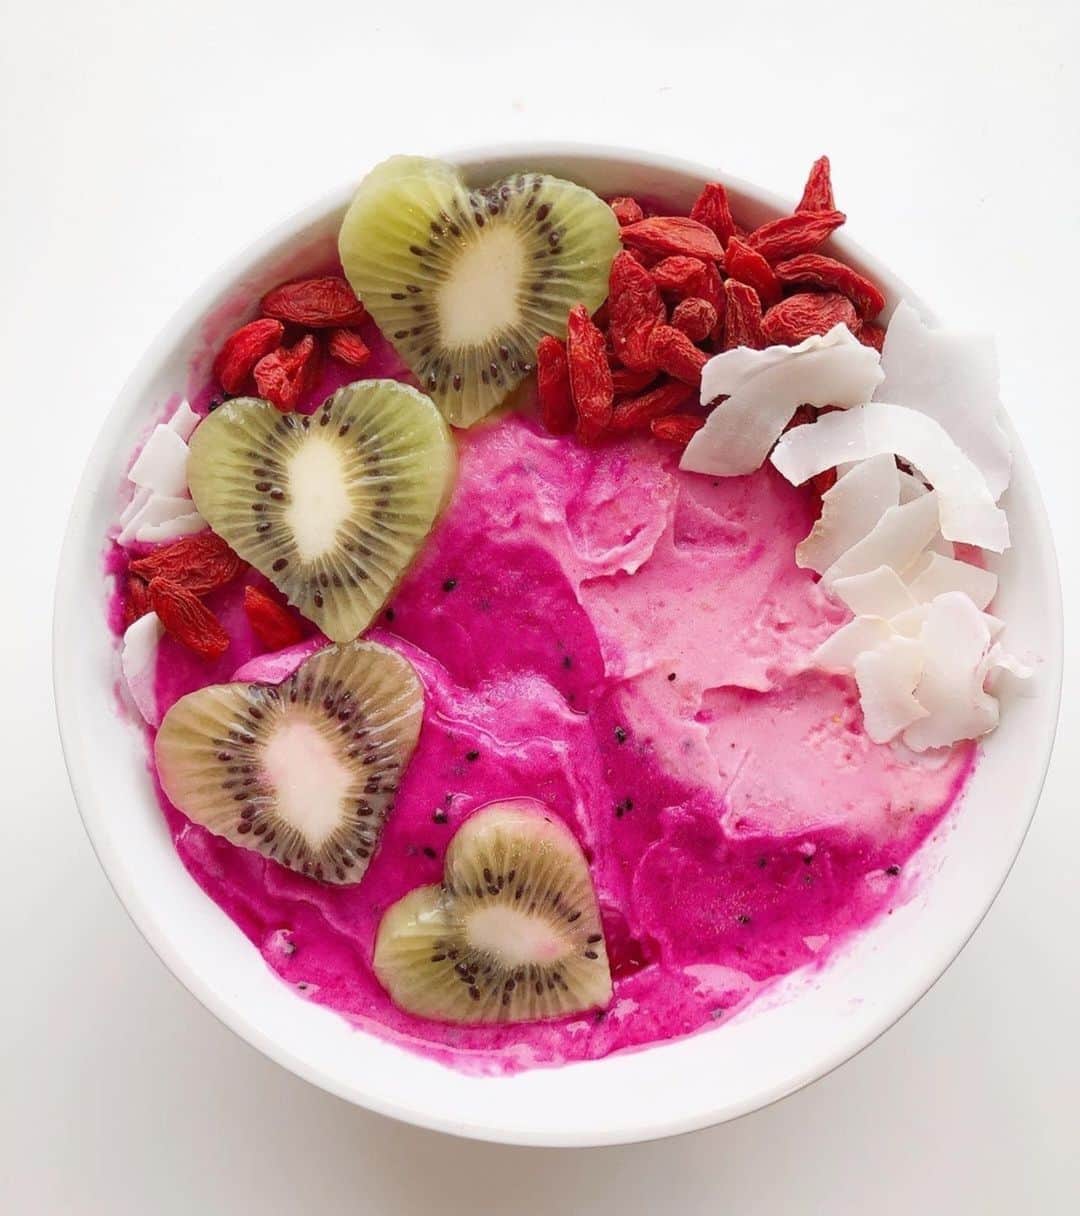 Yonanasのインスタグラム：「A sweet way to start the day!  Give your smoothie bowl a major upgrade with Yonanas.   @brightappetite shared how Yonanas makes it easy to create her Dragonfruit Yonanas bowl:   “Fun fact: you guys know my love for smoothie bowls by now. But discovering @yonanas has made making them so easy. It’s technically a soft serve. I don’t need to add any liquids, no more scrapping the sides of the blender, no more pausing and shaking. I just take the fruit out of freezer, wait 5 minutes and toss it in @yonanas and out comes yumminess.”」